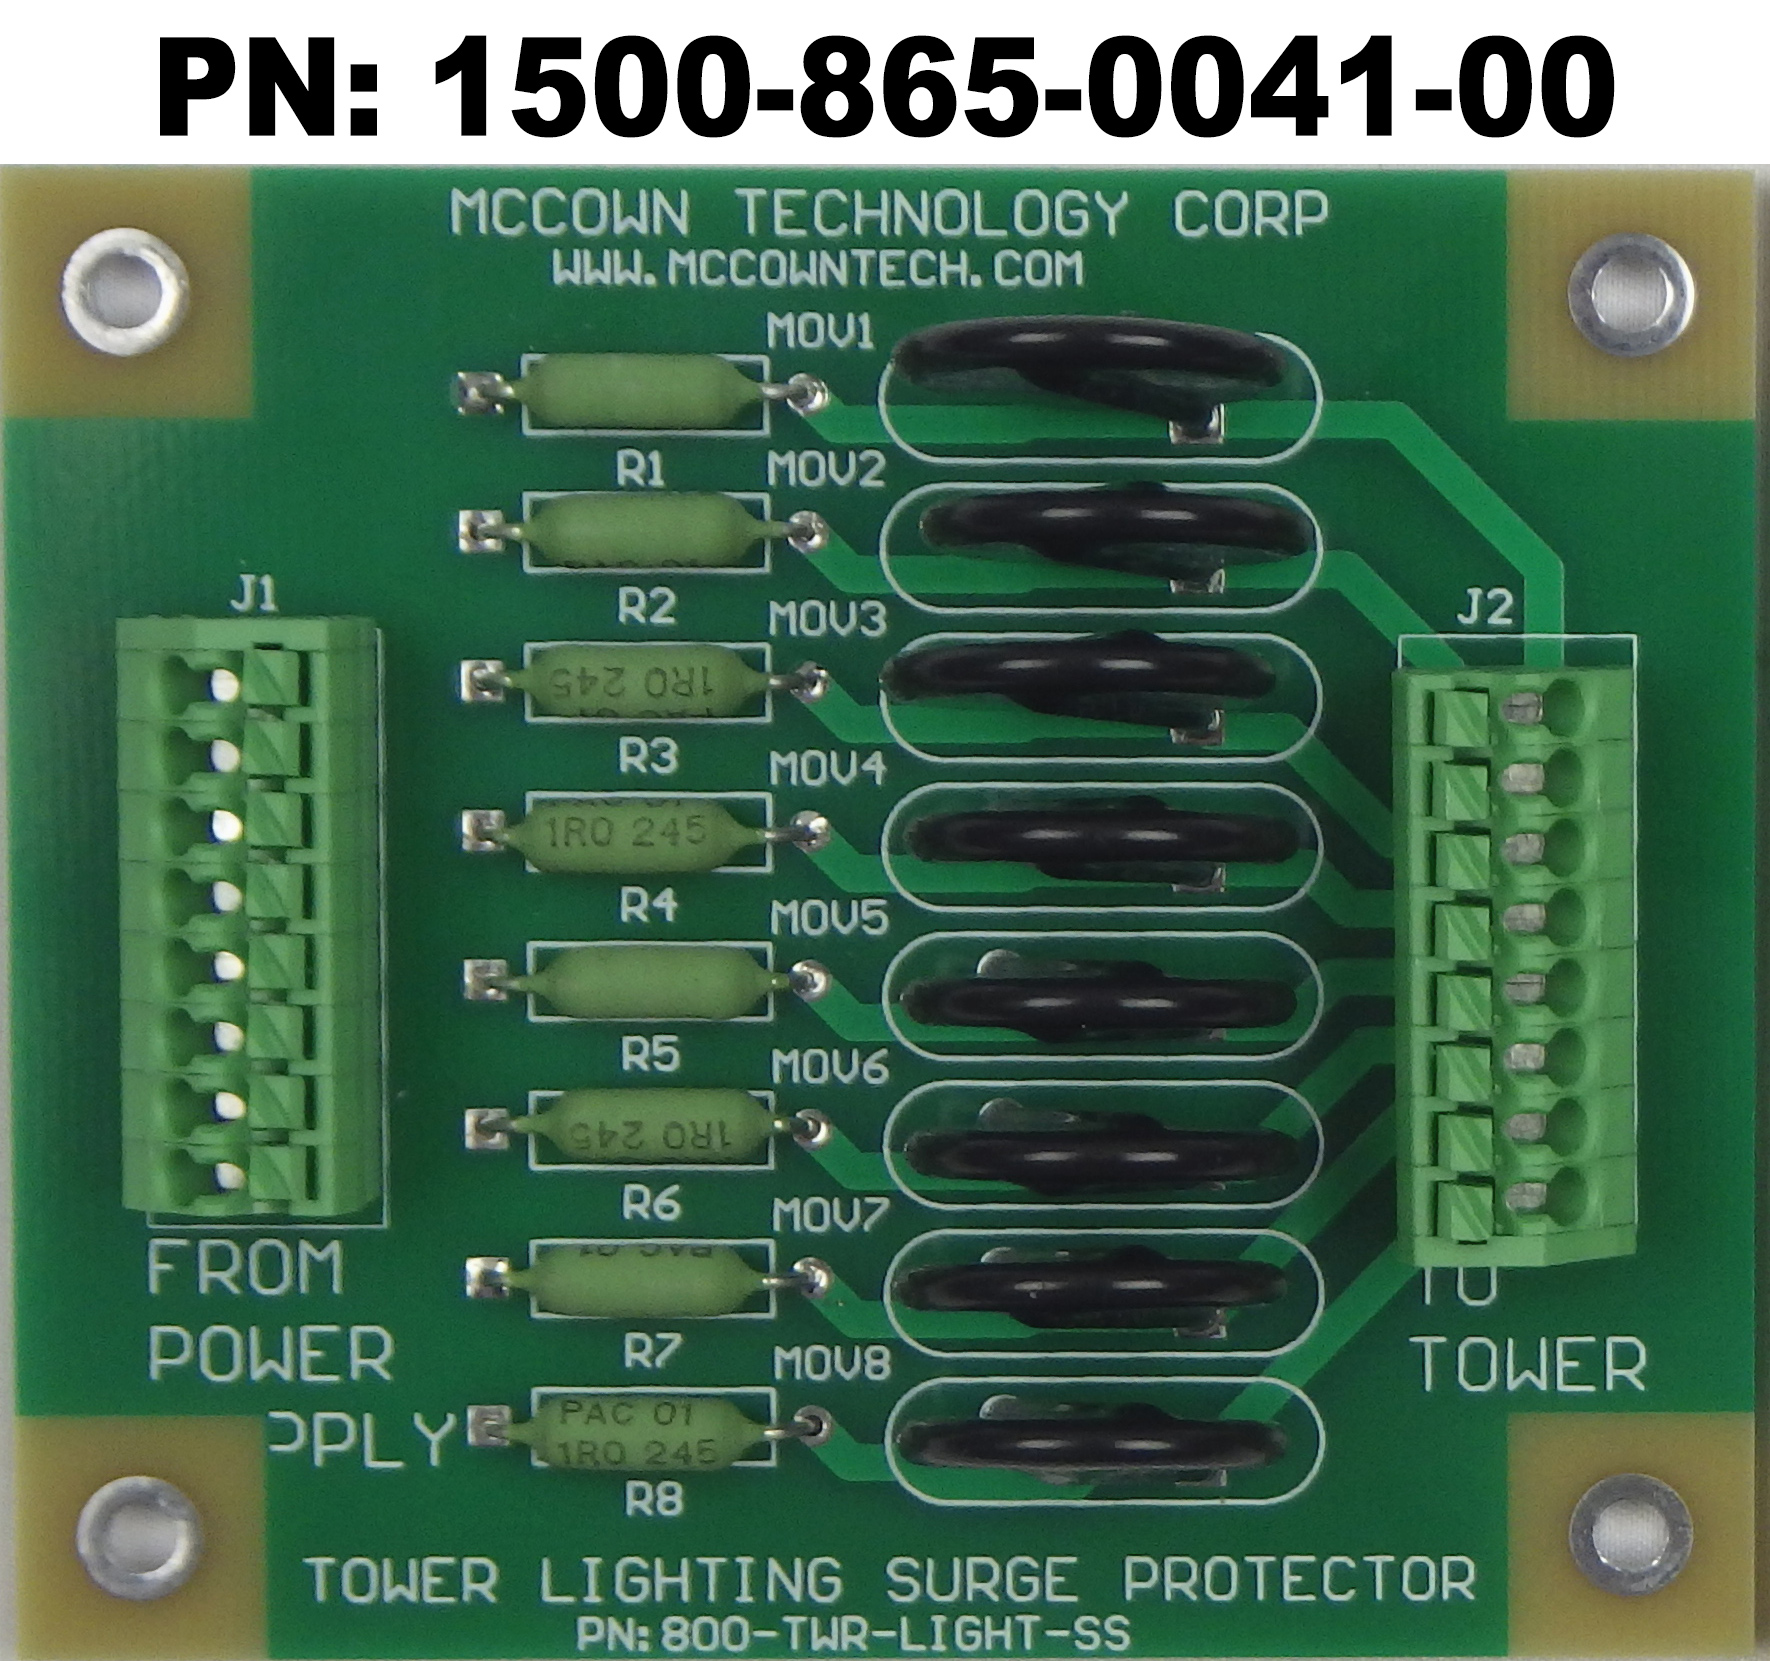 Dialite replacement surge protector PCB